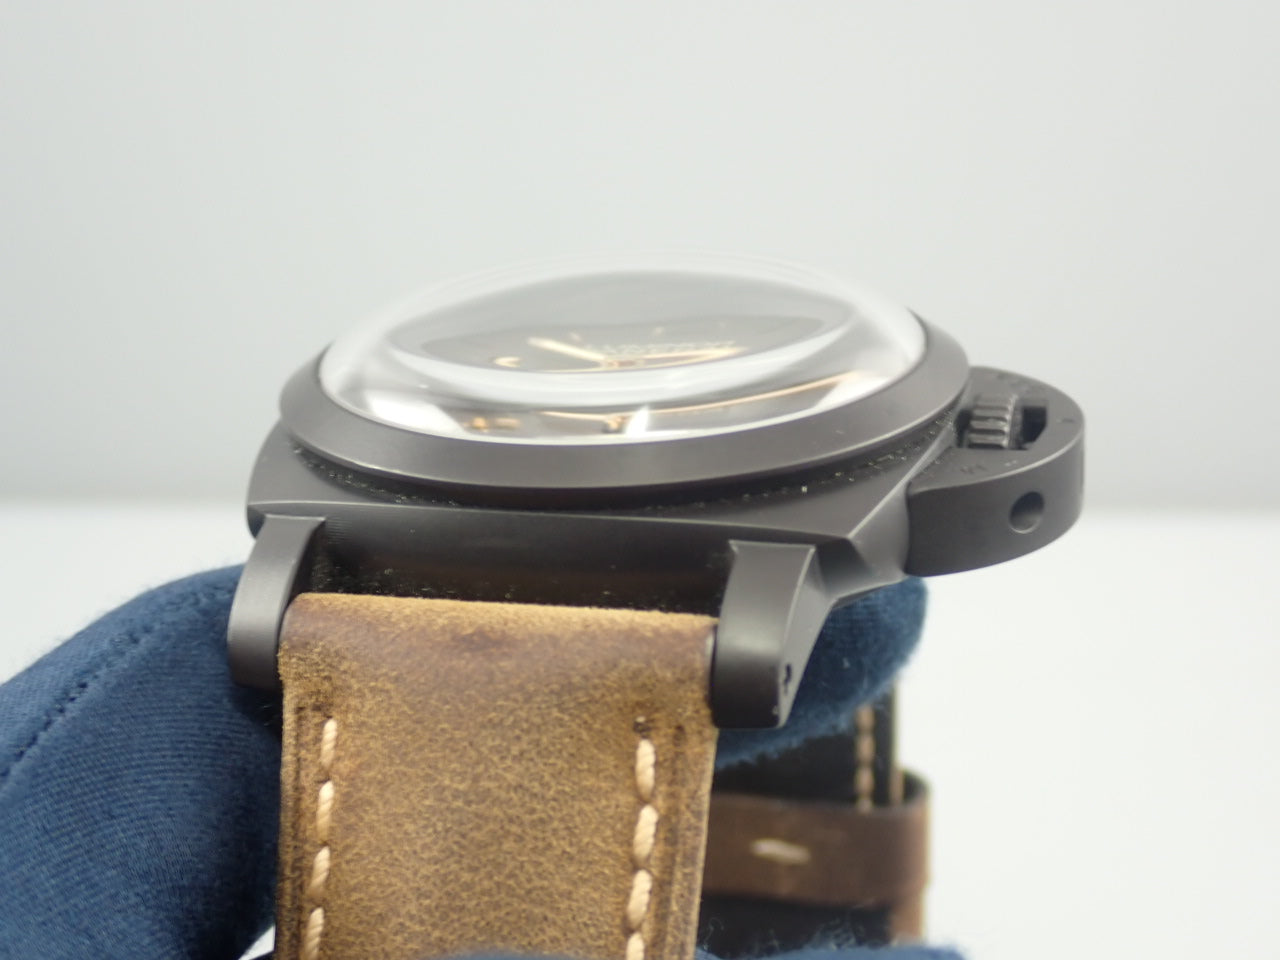 Panerai Luminor Composite 1950 3 Days &lt;Warranty Box and Others&gt;